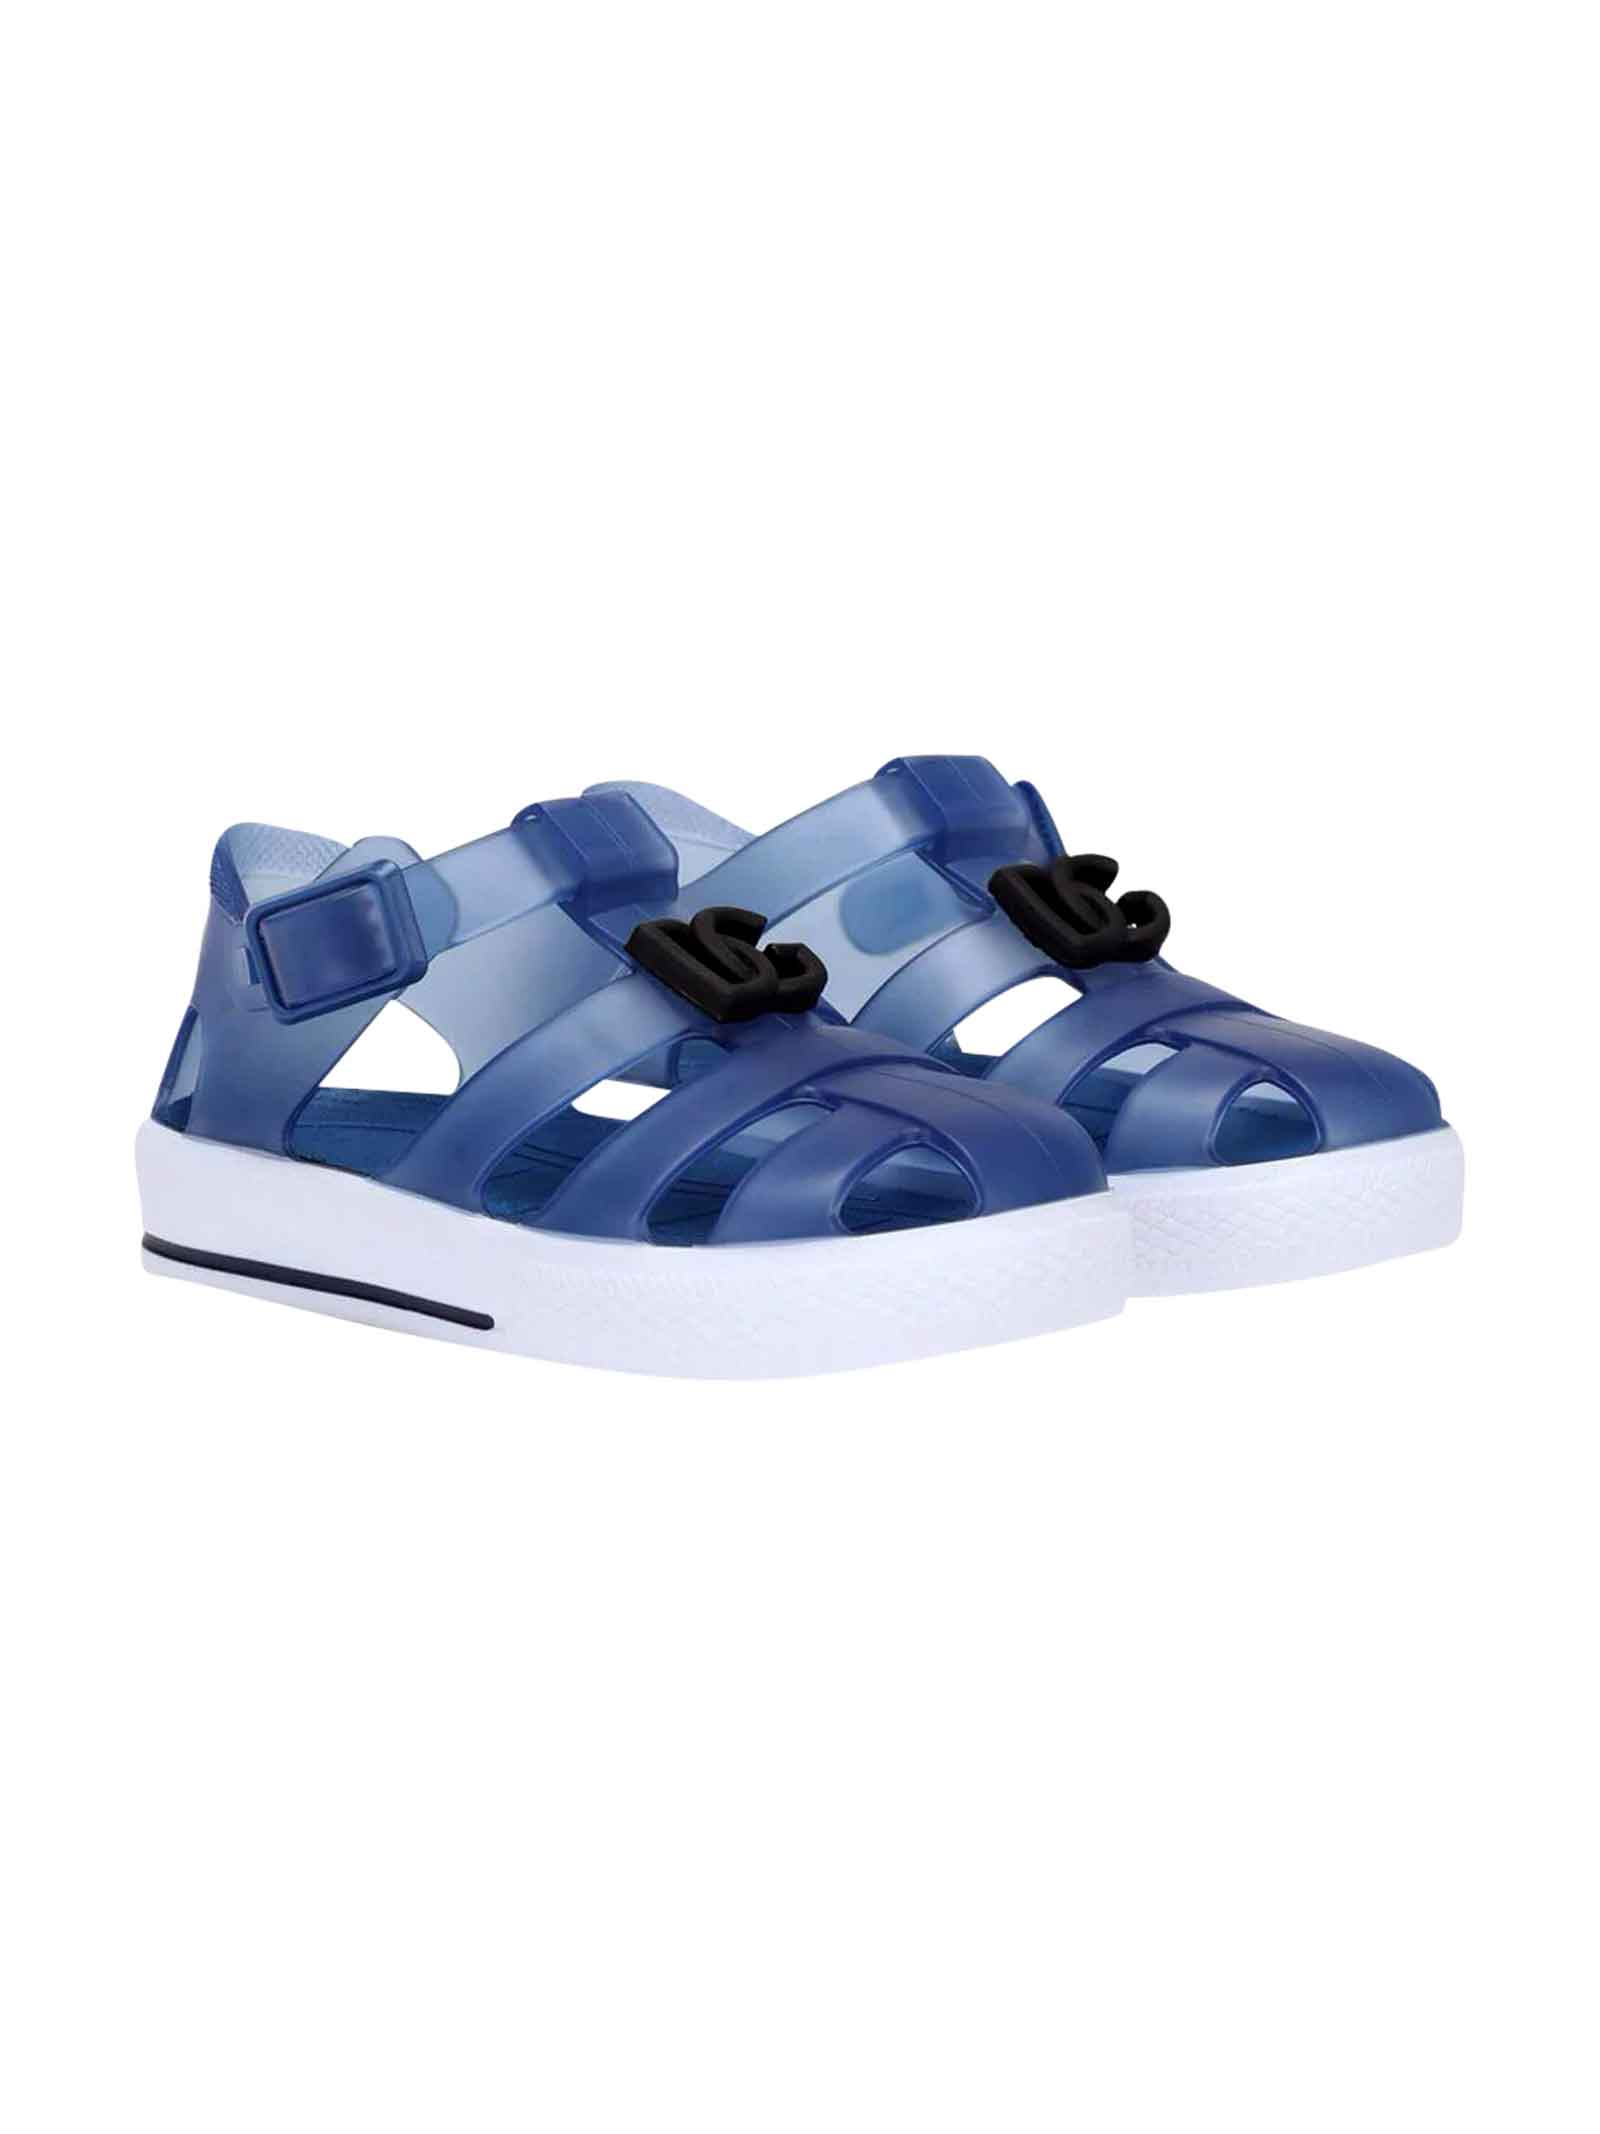 Dolce & Gabbana Blue Sandals With Cage Tip